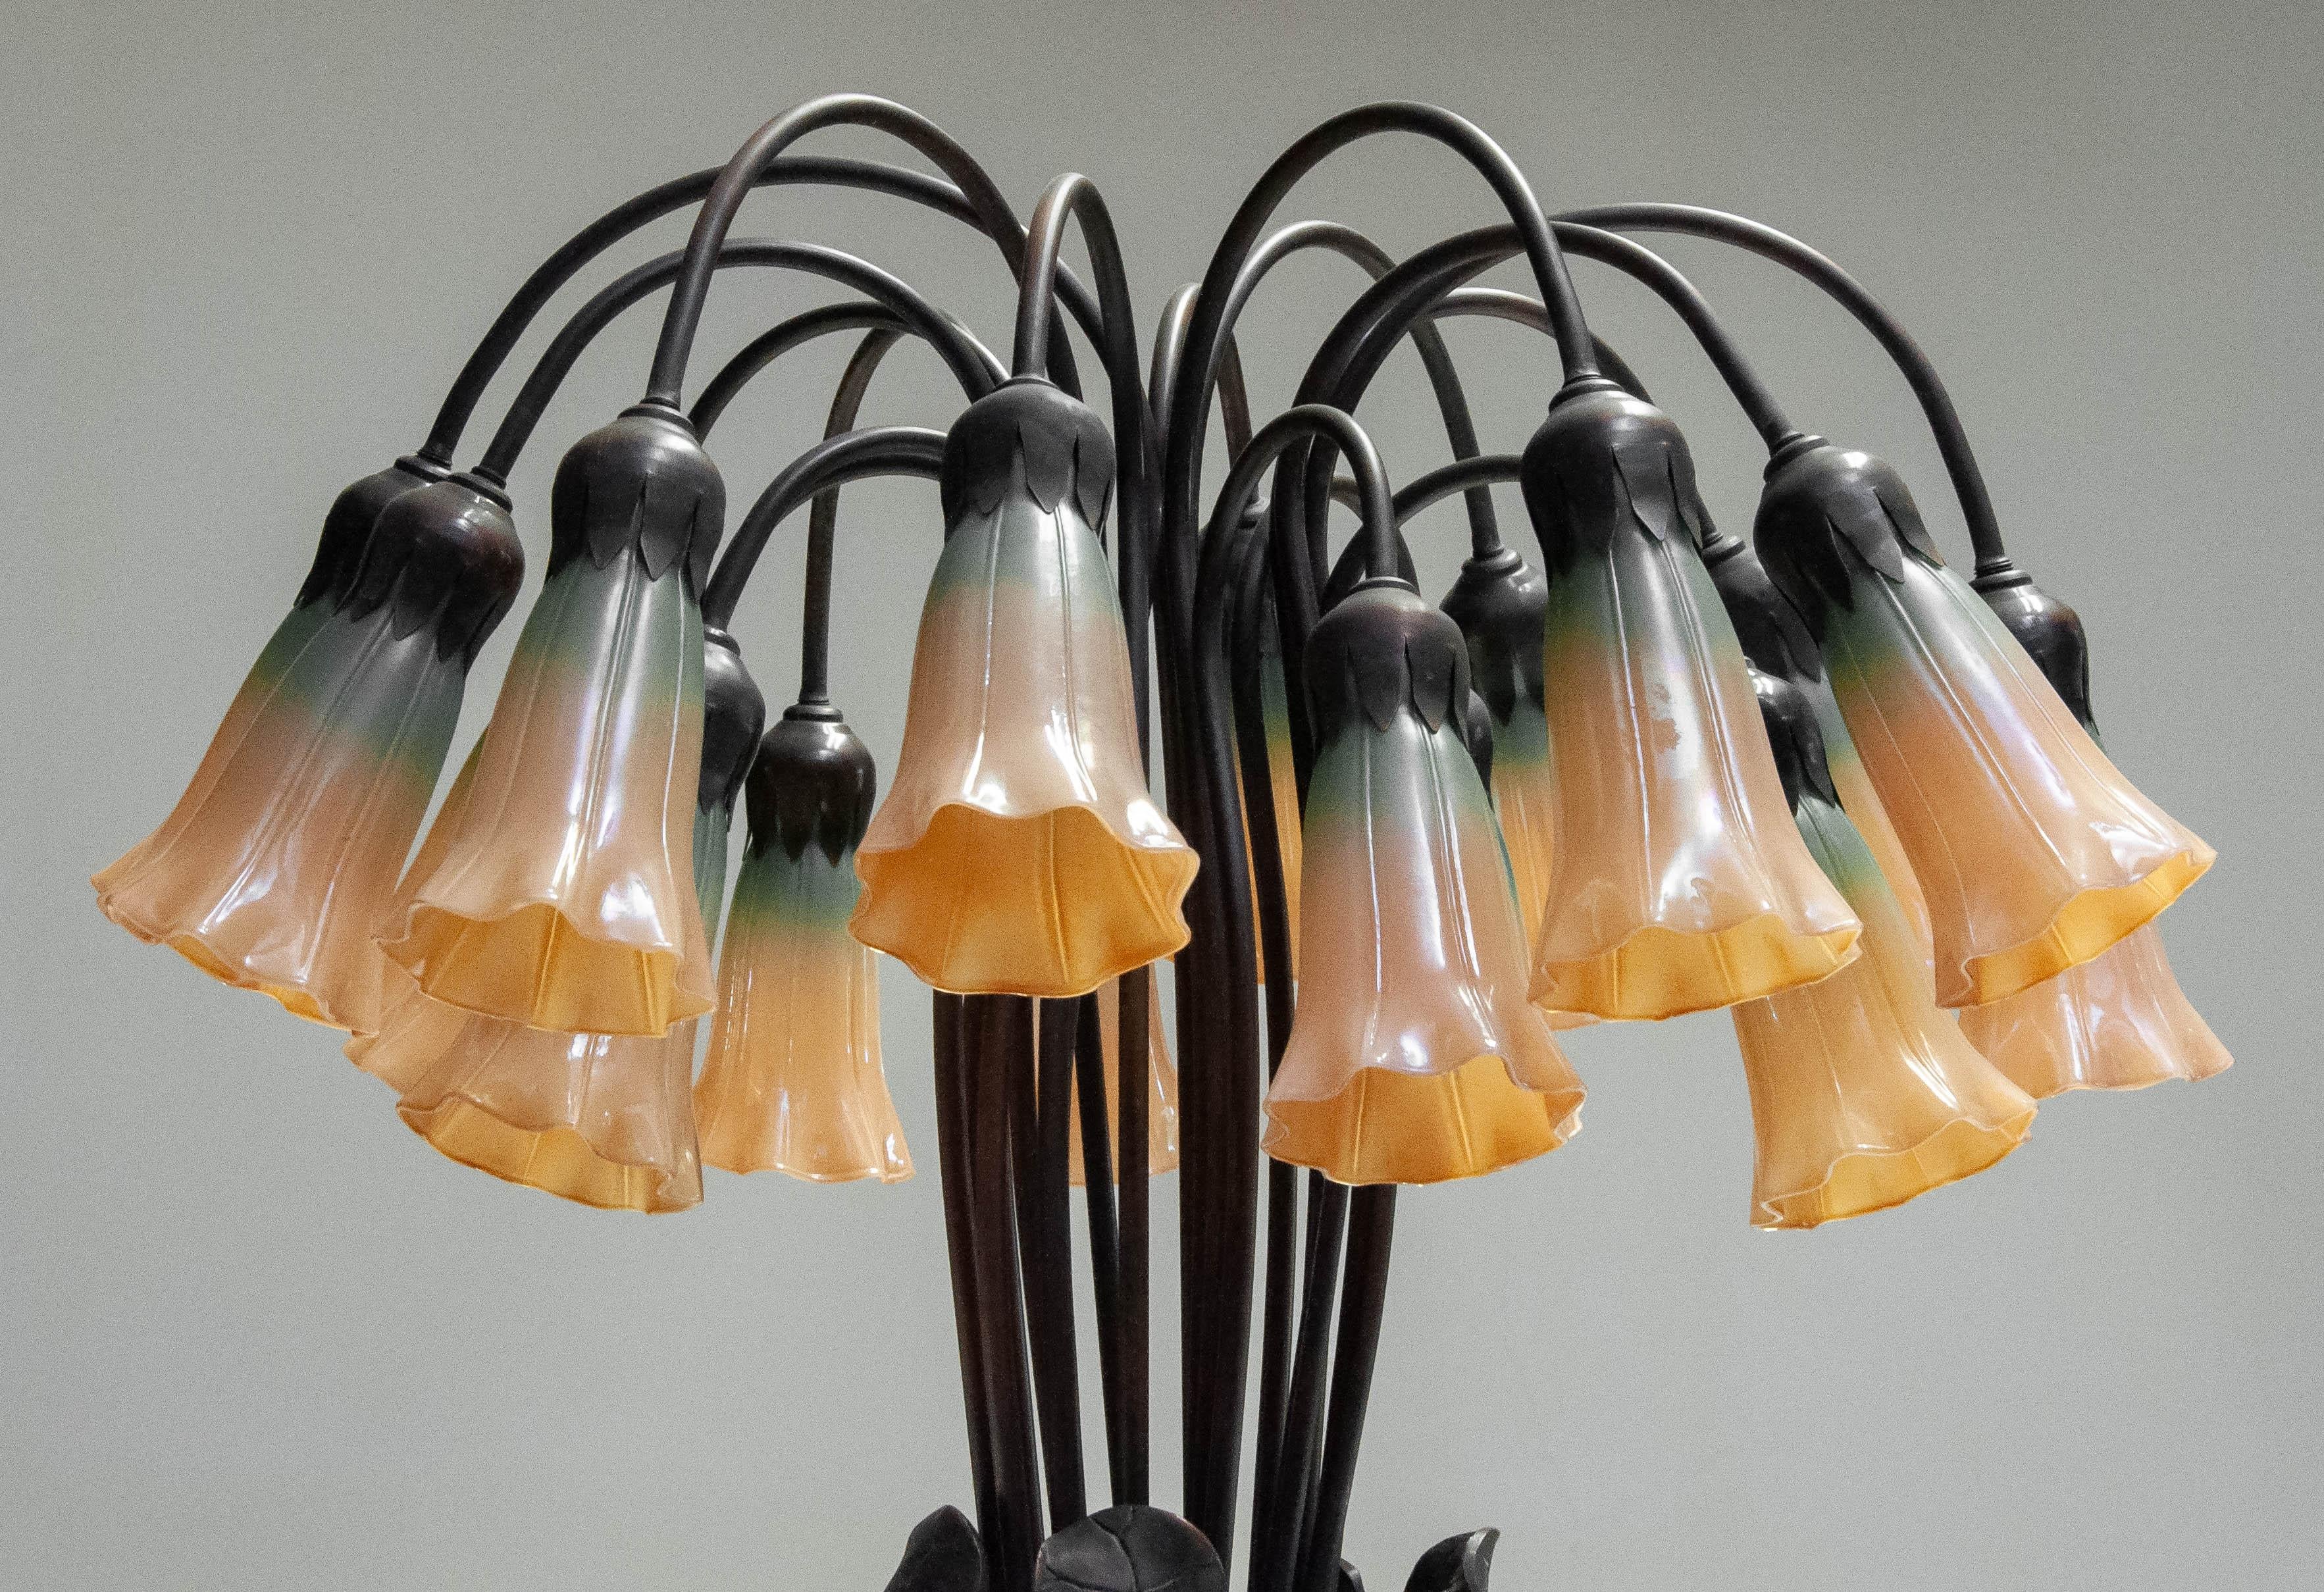 1980s In The Manner Of Tiffany 'Lilly' Table Lamp Bronze And 18 Art Glass Shades In Good Condition For Sale In Silvolde, Gelderland